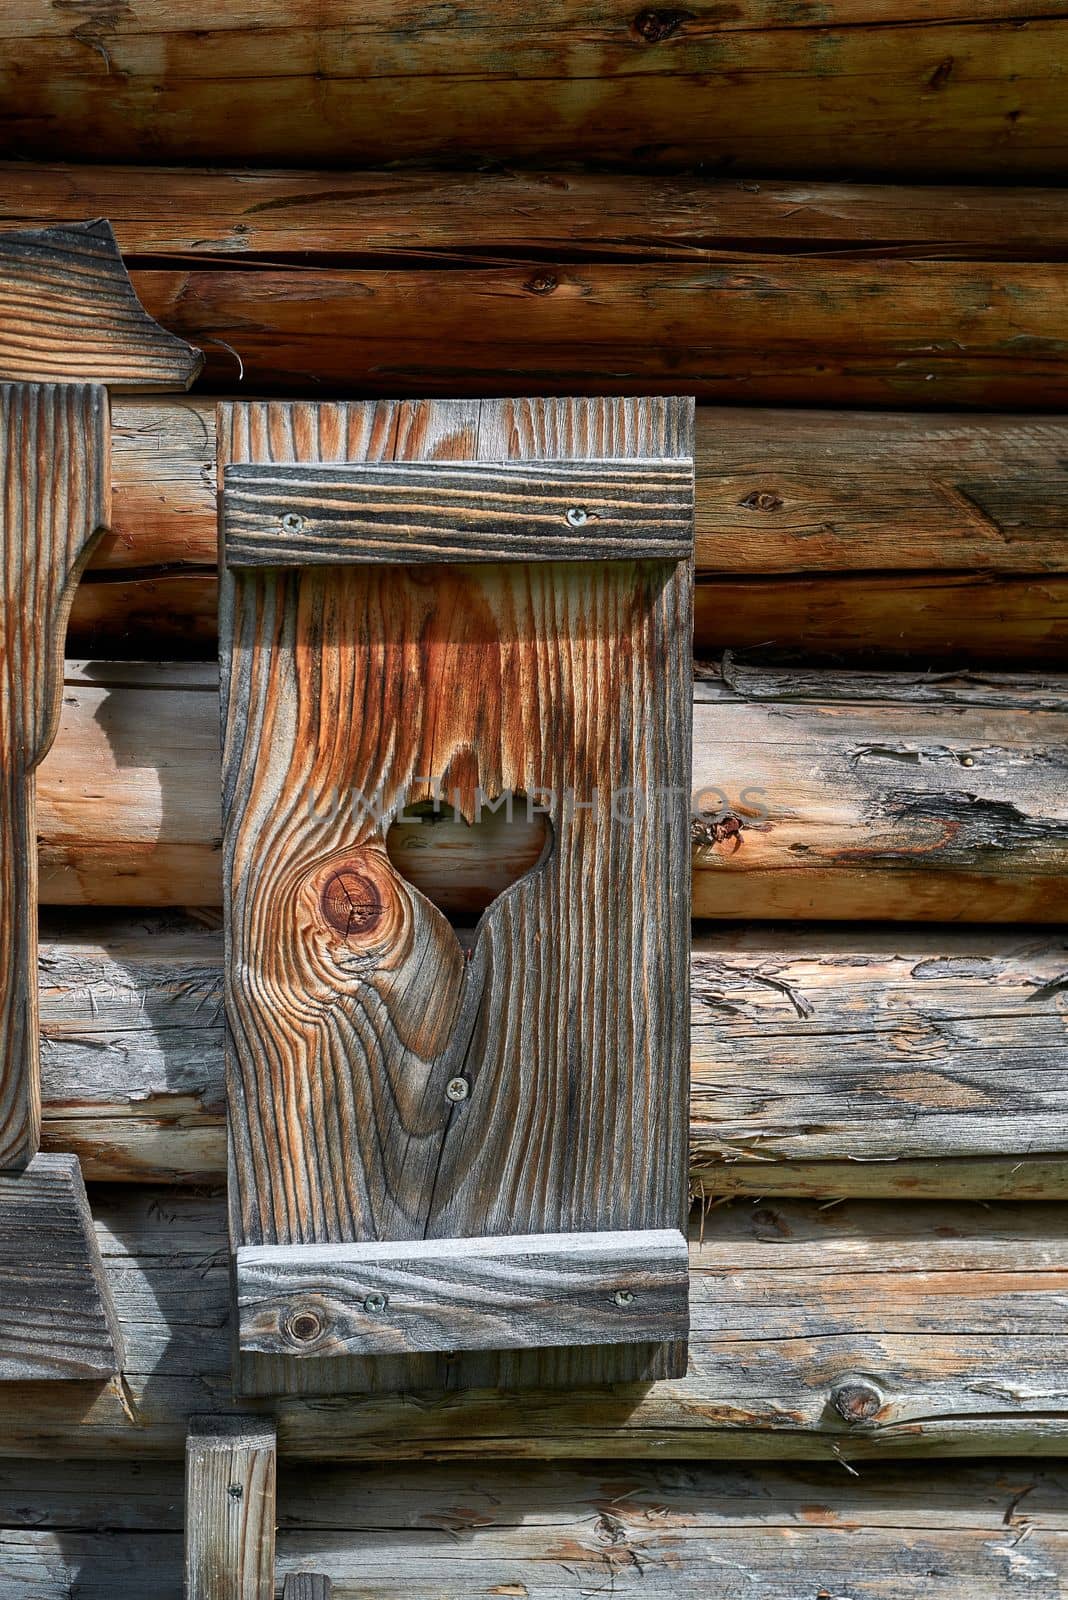 A window shutter decorated with a heart at a small wooden alpine hut.